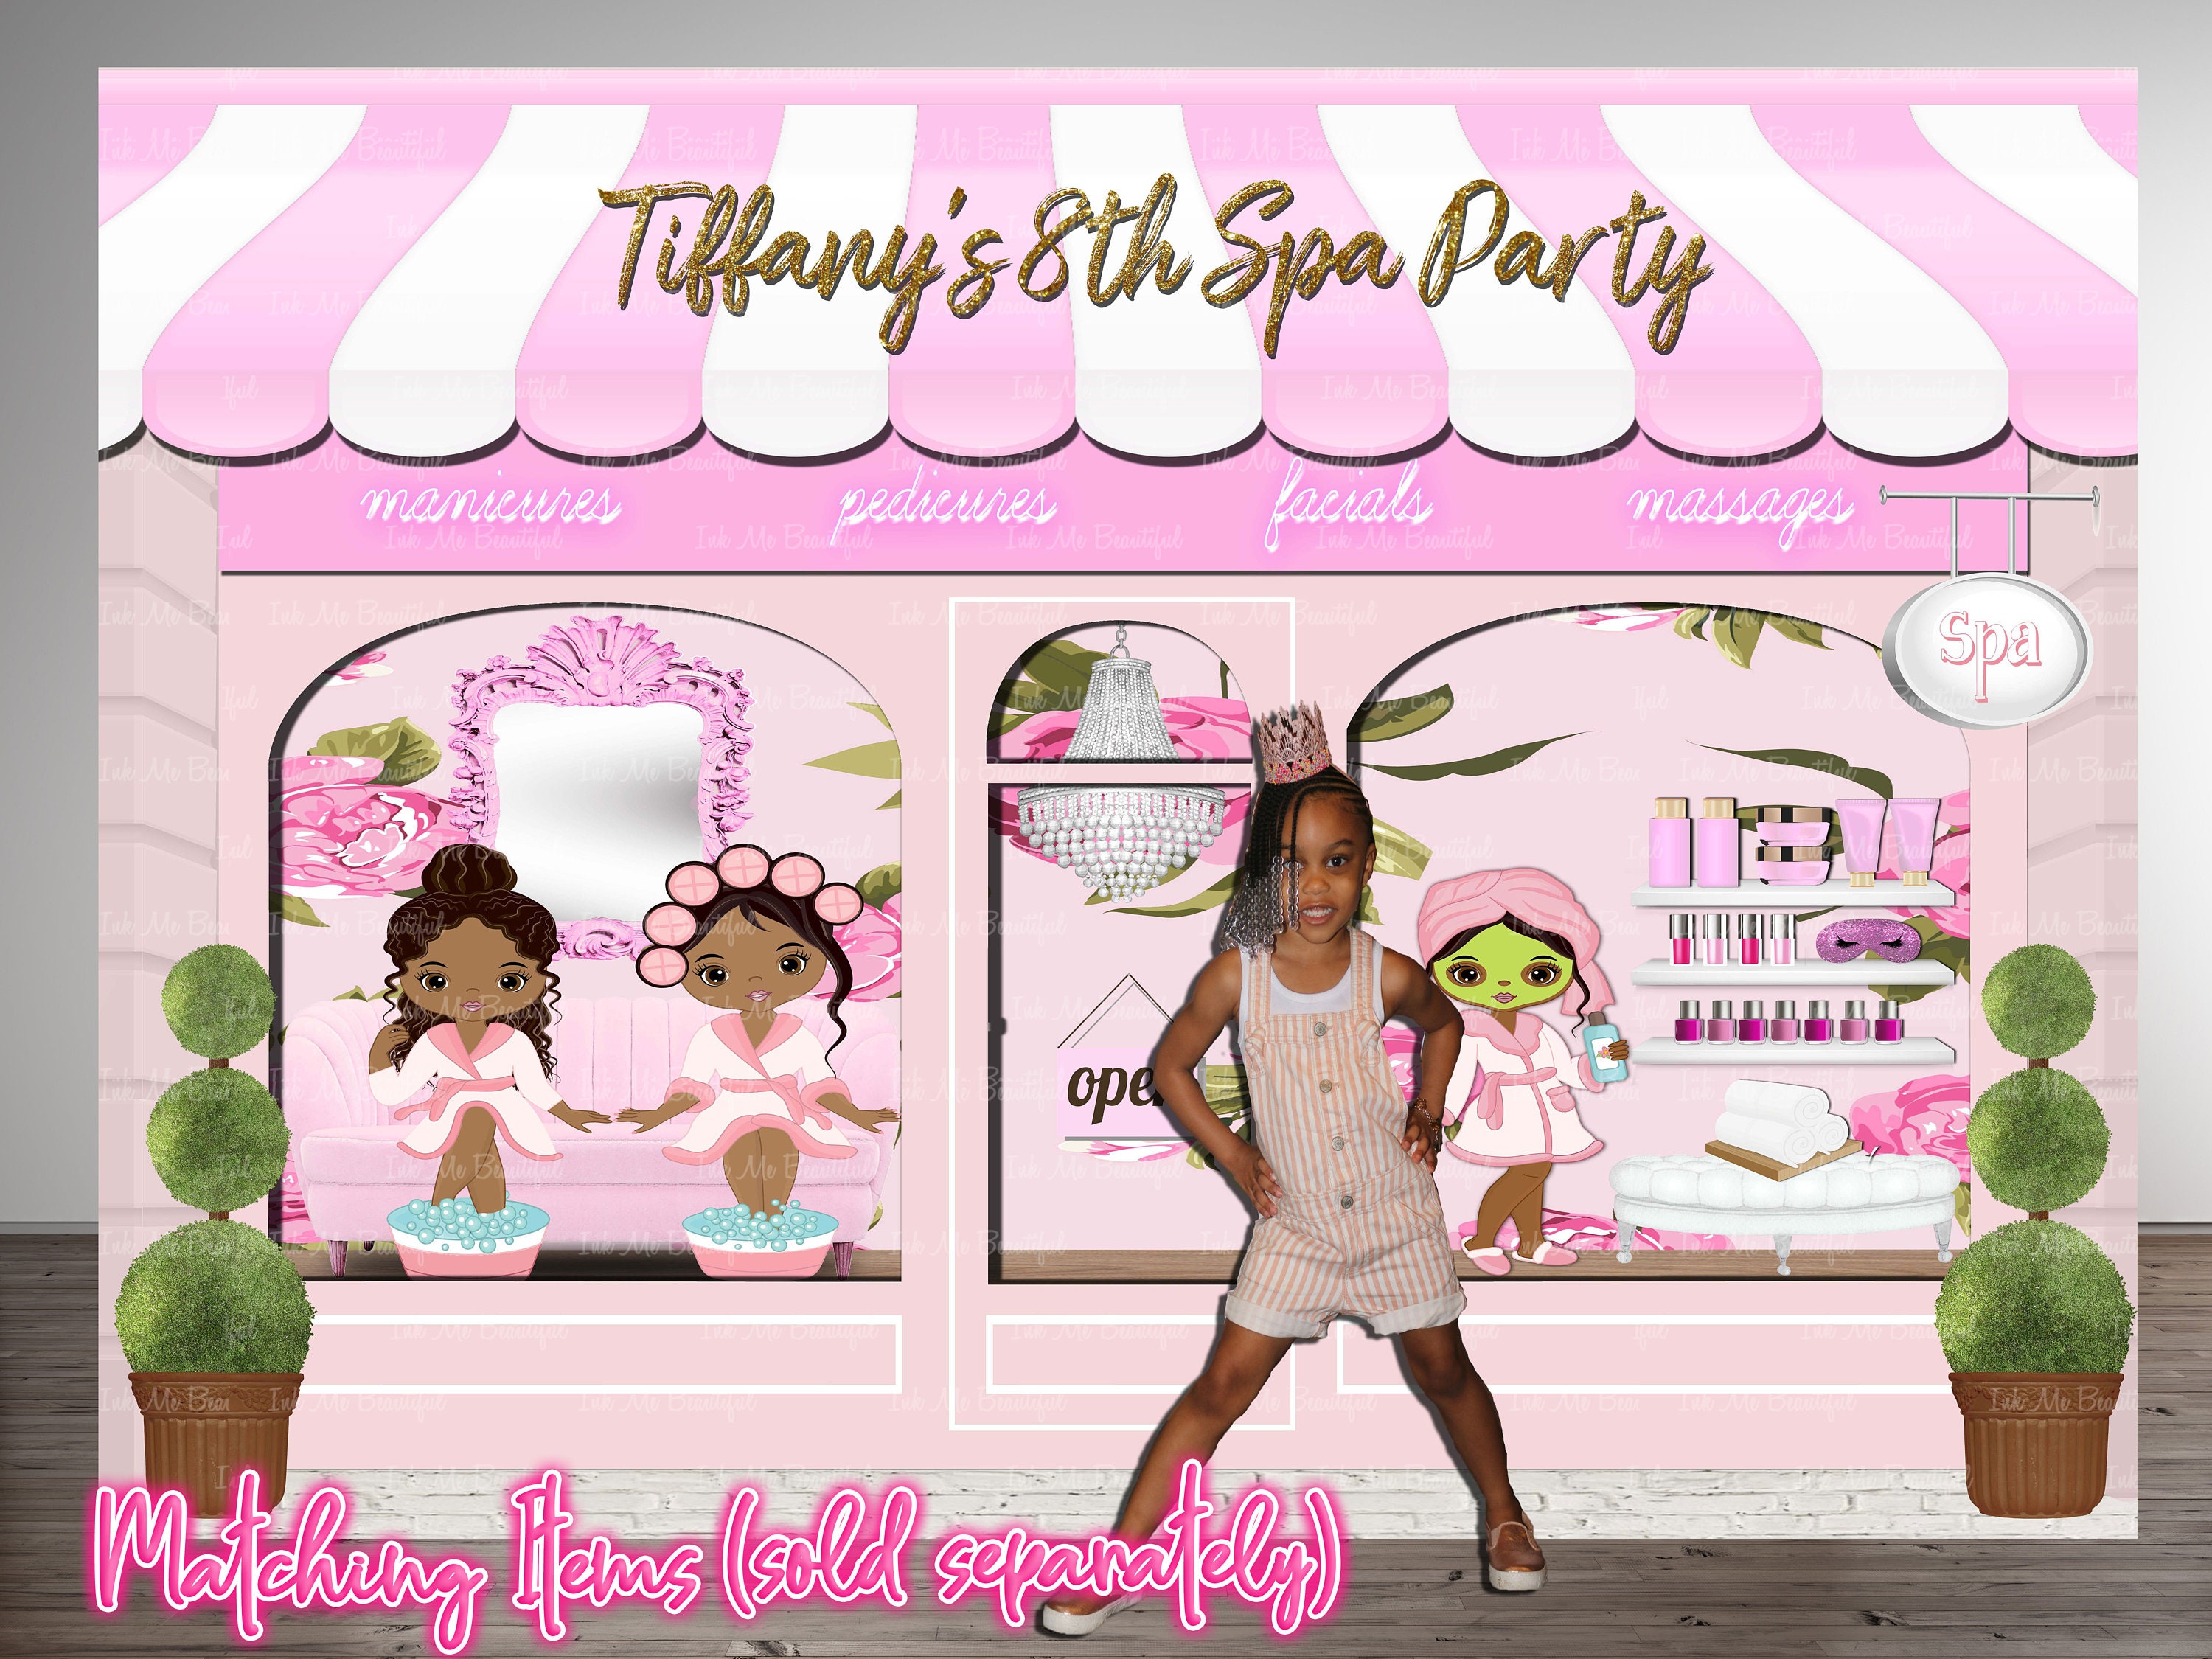 Girls Pamper Party Decorations, Girls Birthday Party, Spa Party